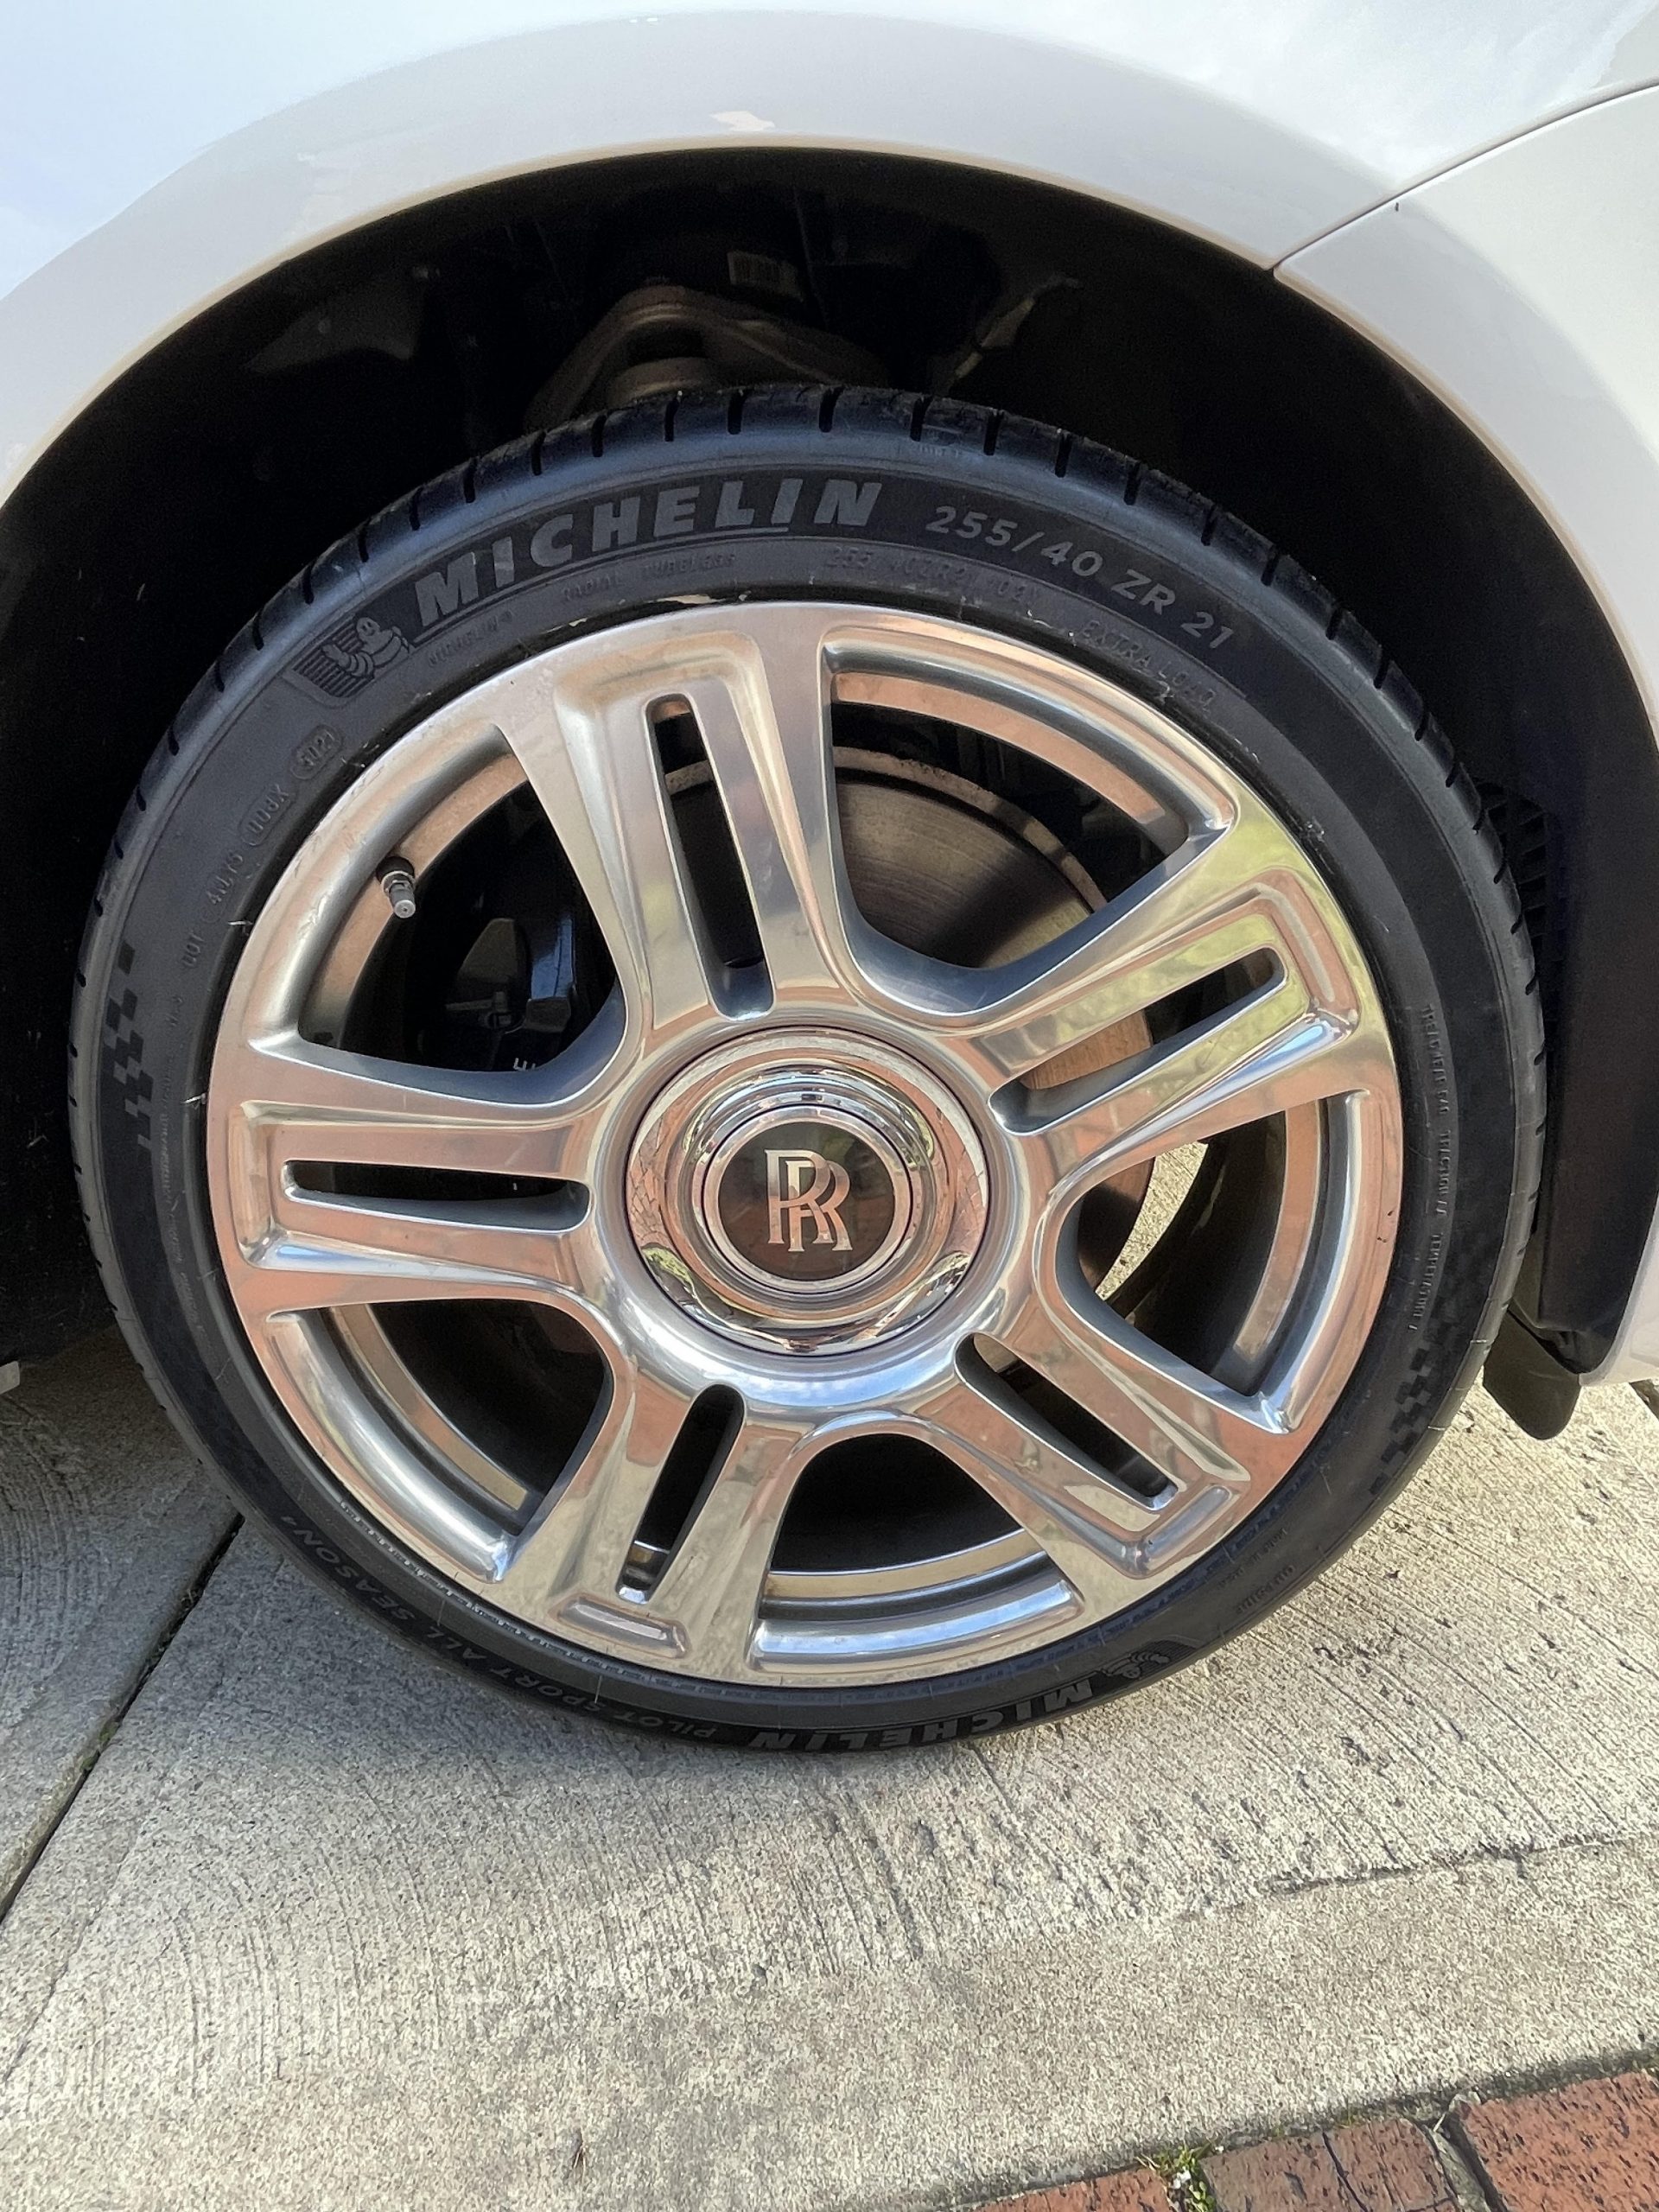 Is Roadside Assistance Needed for tire repair